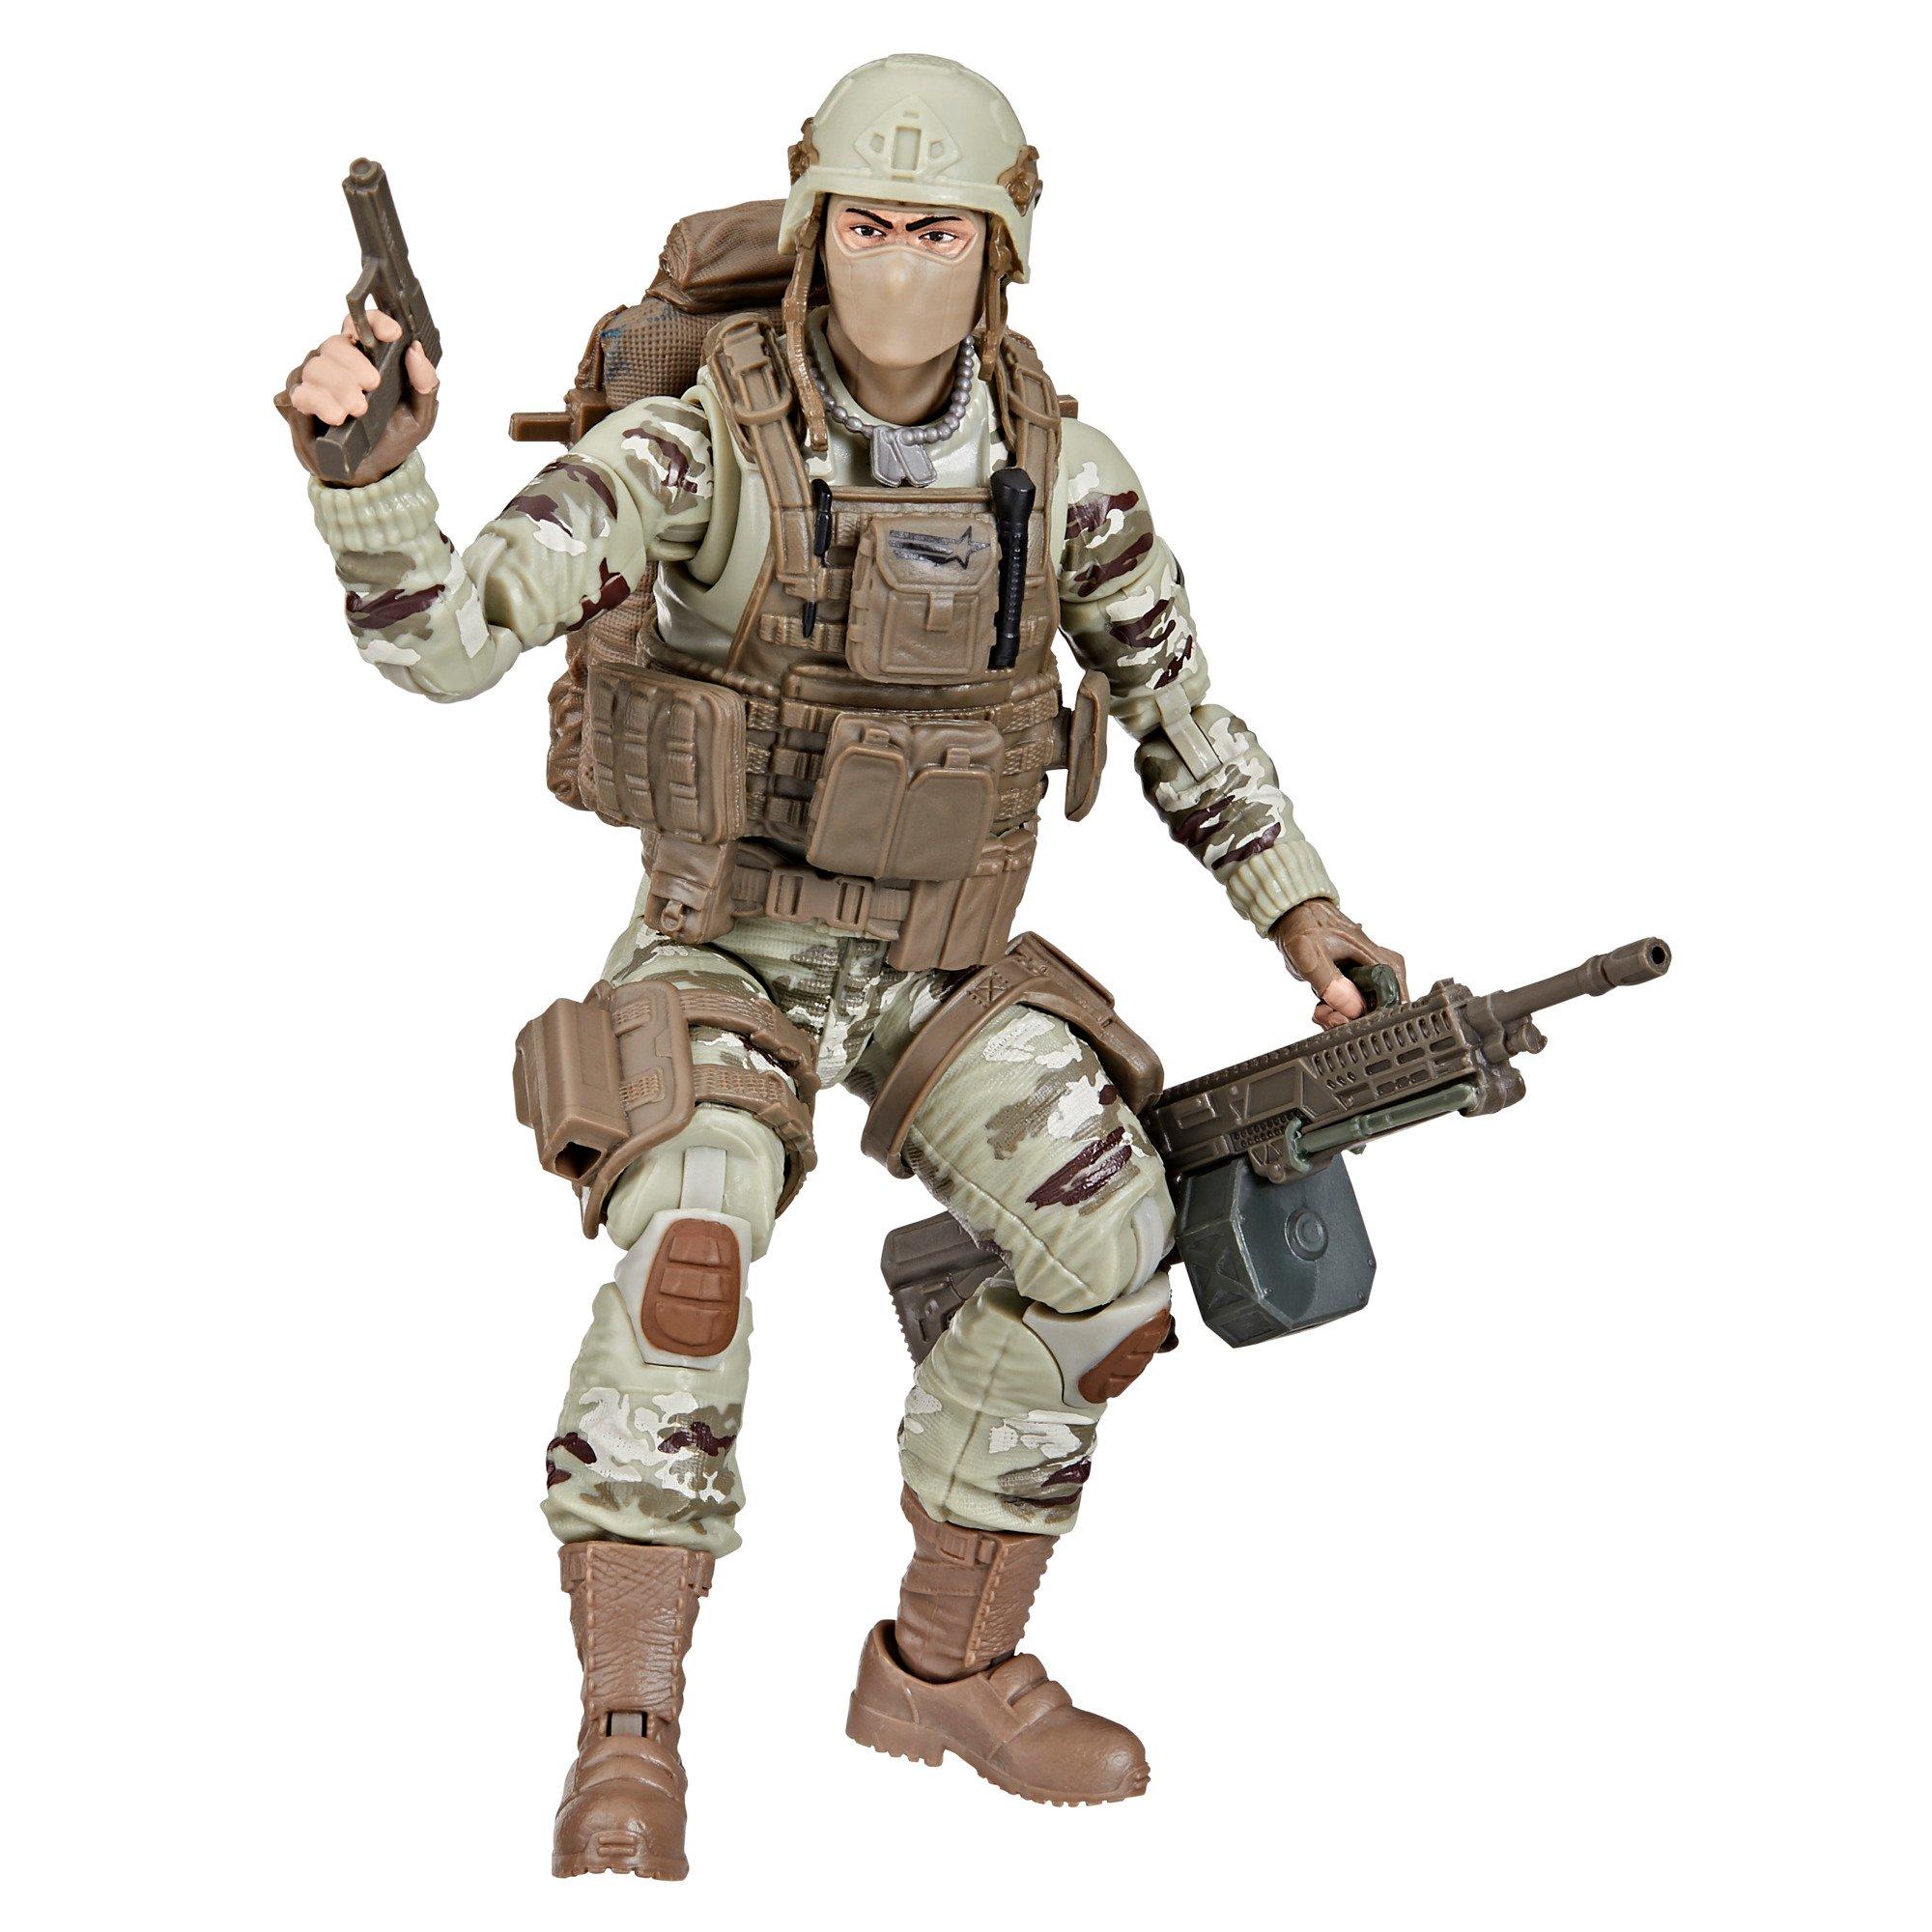 Hasbro G.I. Joe Classified Series 60th Anniversary Action Soldier 6-in  Action Figure